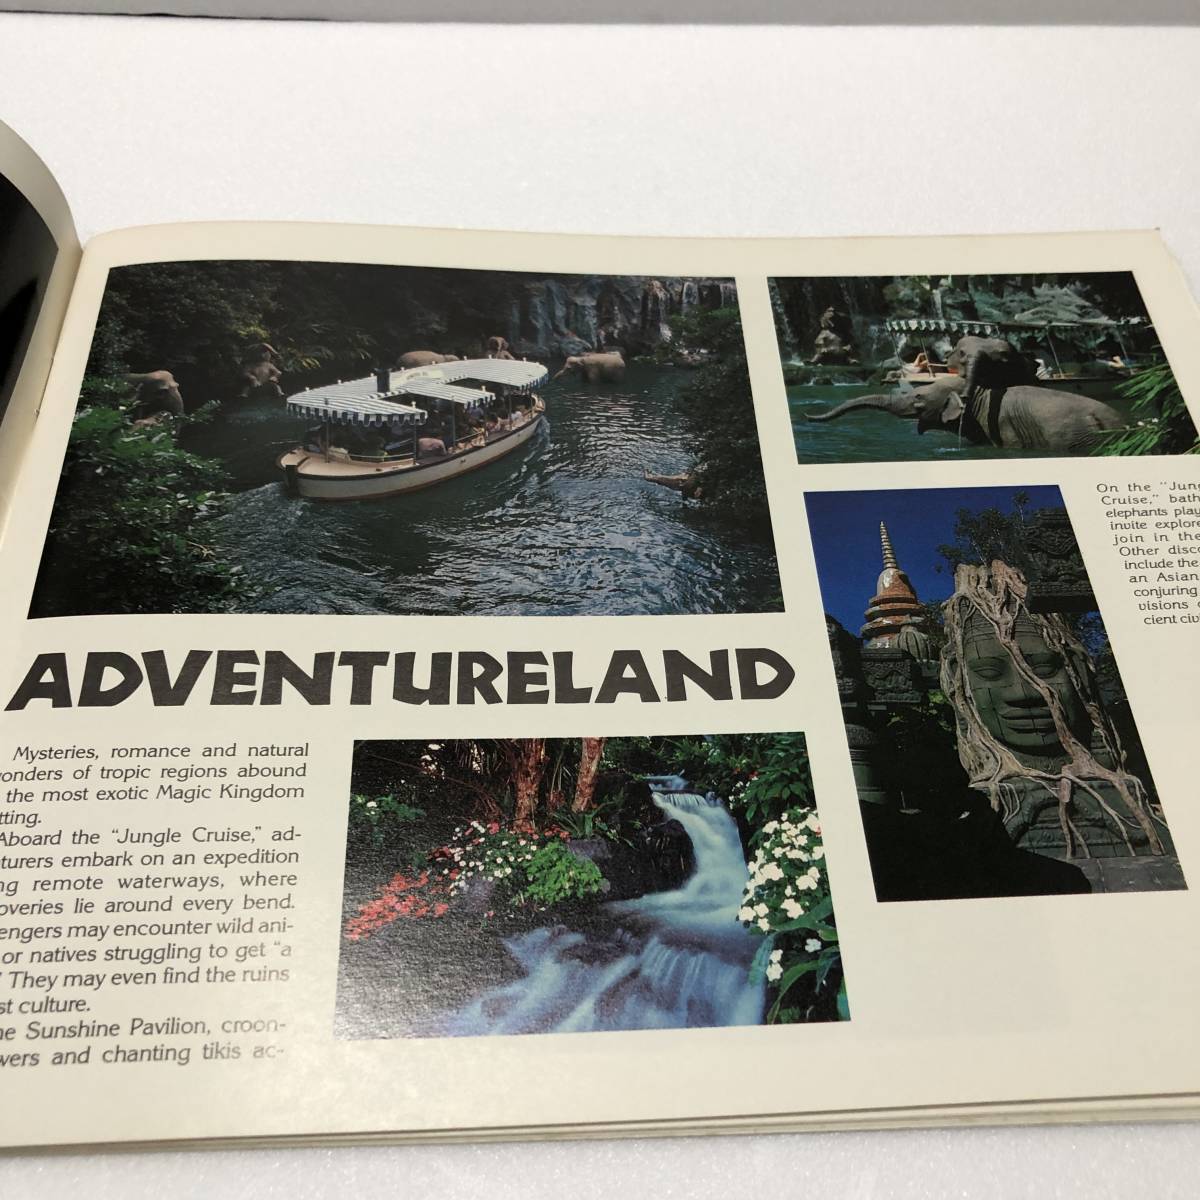 Walt Disney World - A Pictoral Souvenir - 64 Pages Full-Color Illustrated (1983)　アメリカ　ウォルトディズニー　カタログ　パンフ_画像4